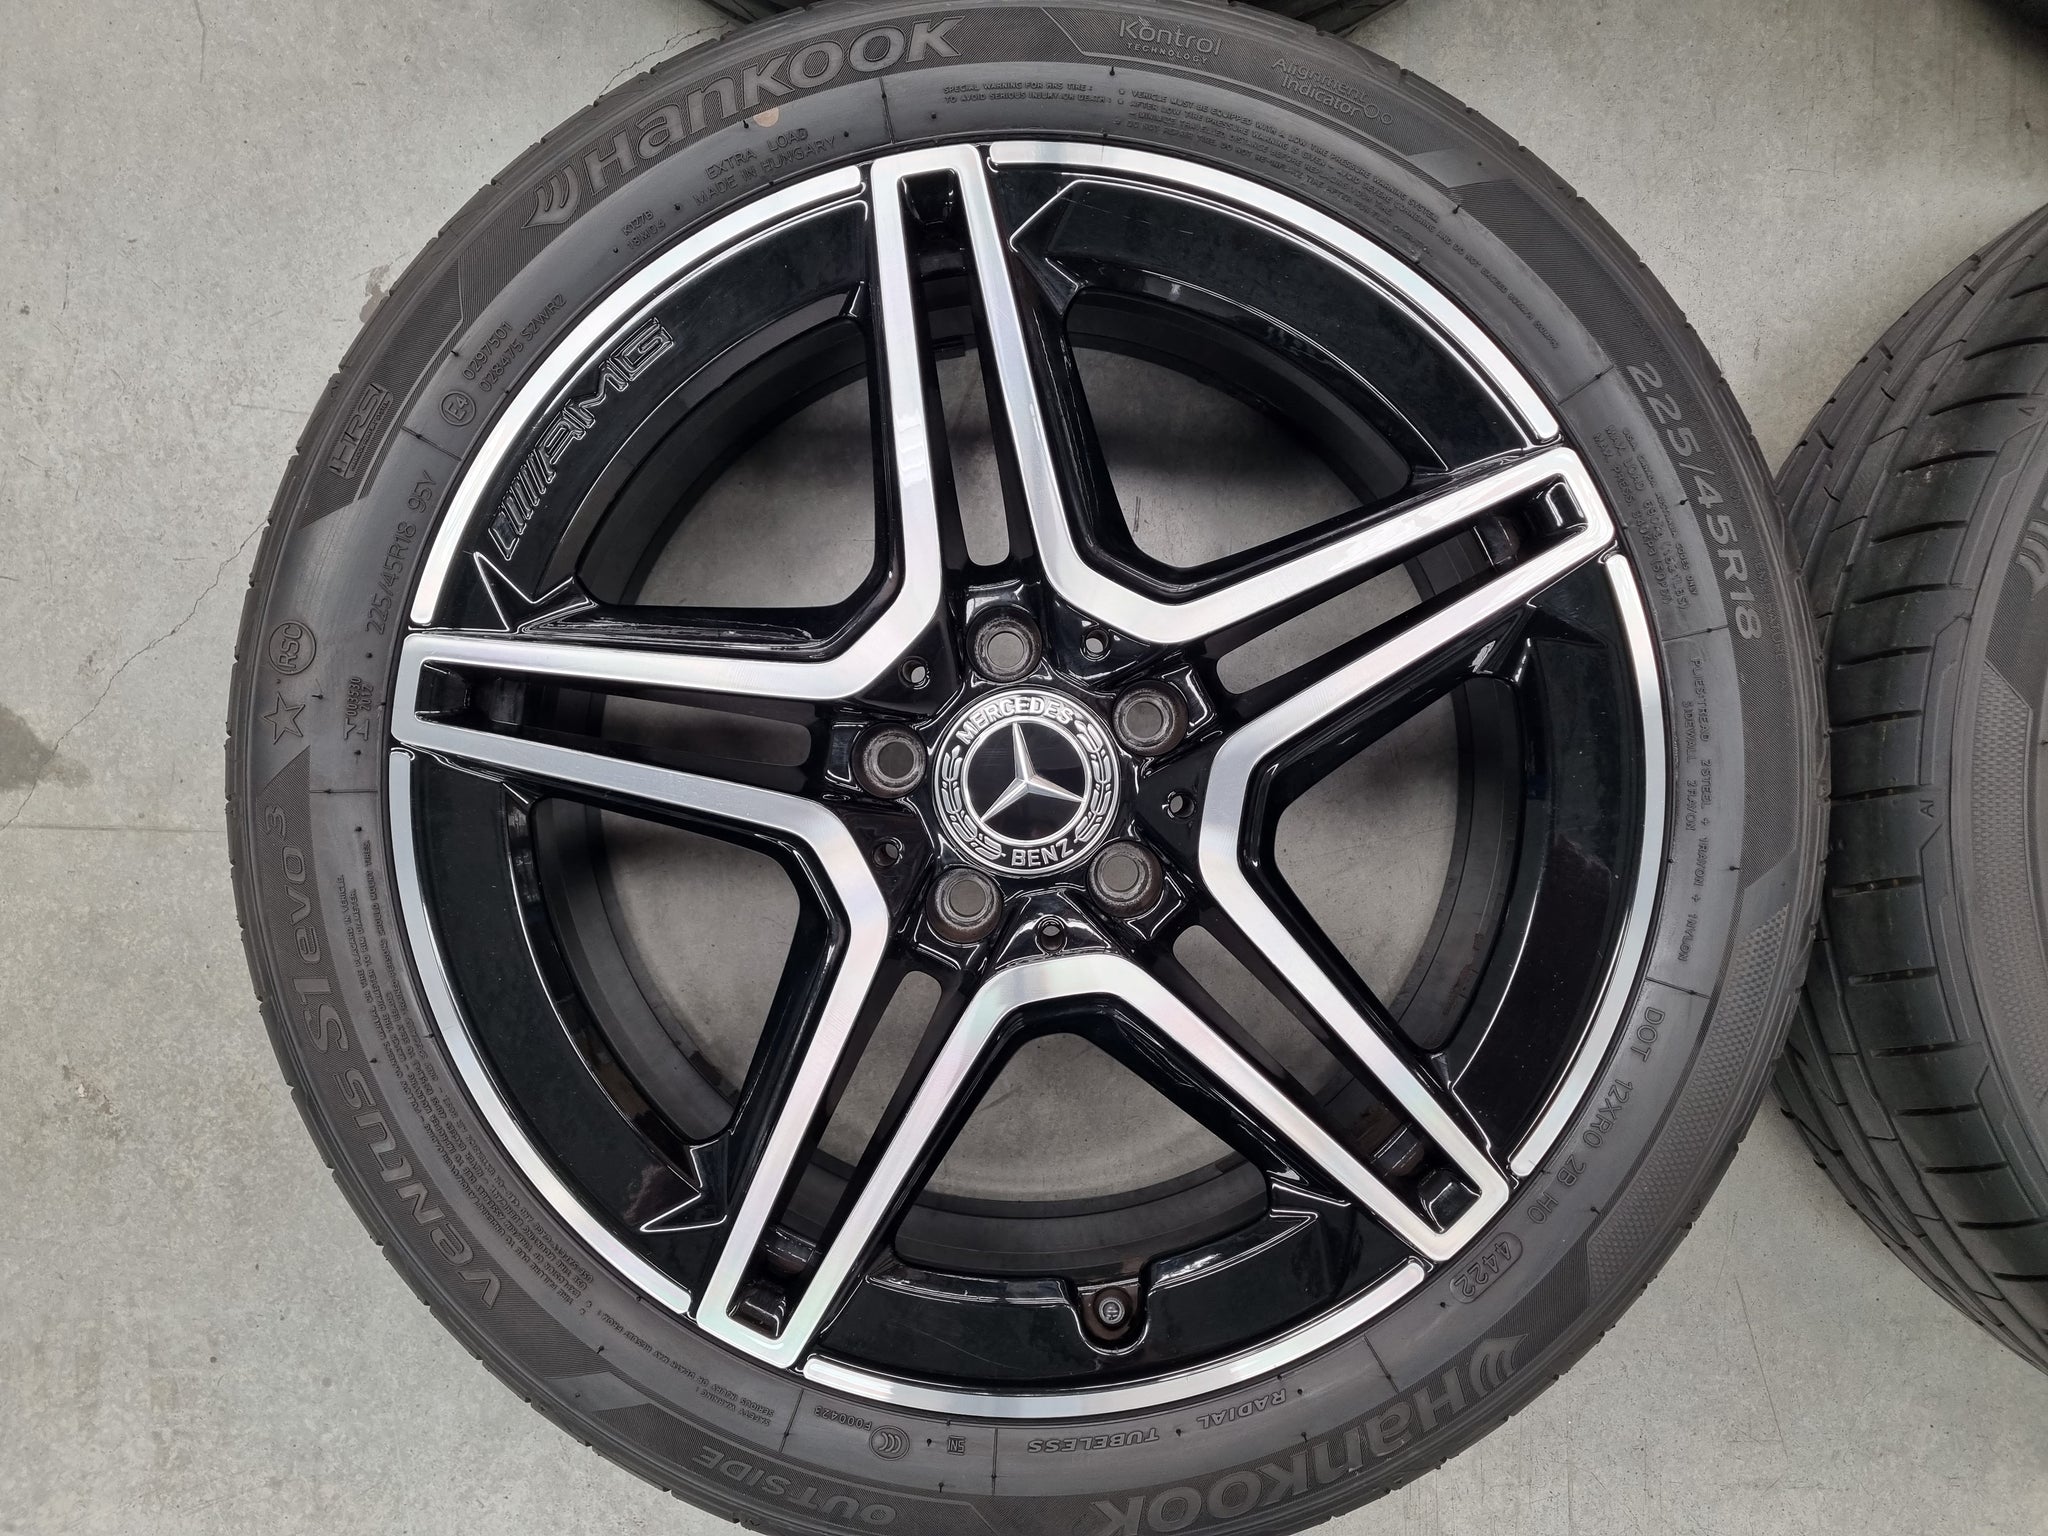 Load image into Gallery viewer, Genuine Mercedes Benz AMG A250 W177 18 Inch Wheels and Tyres Set of 4
